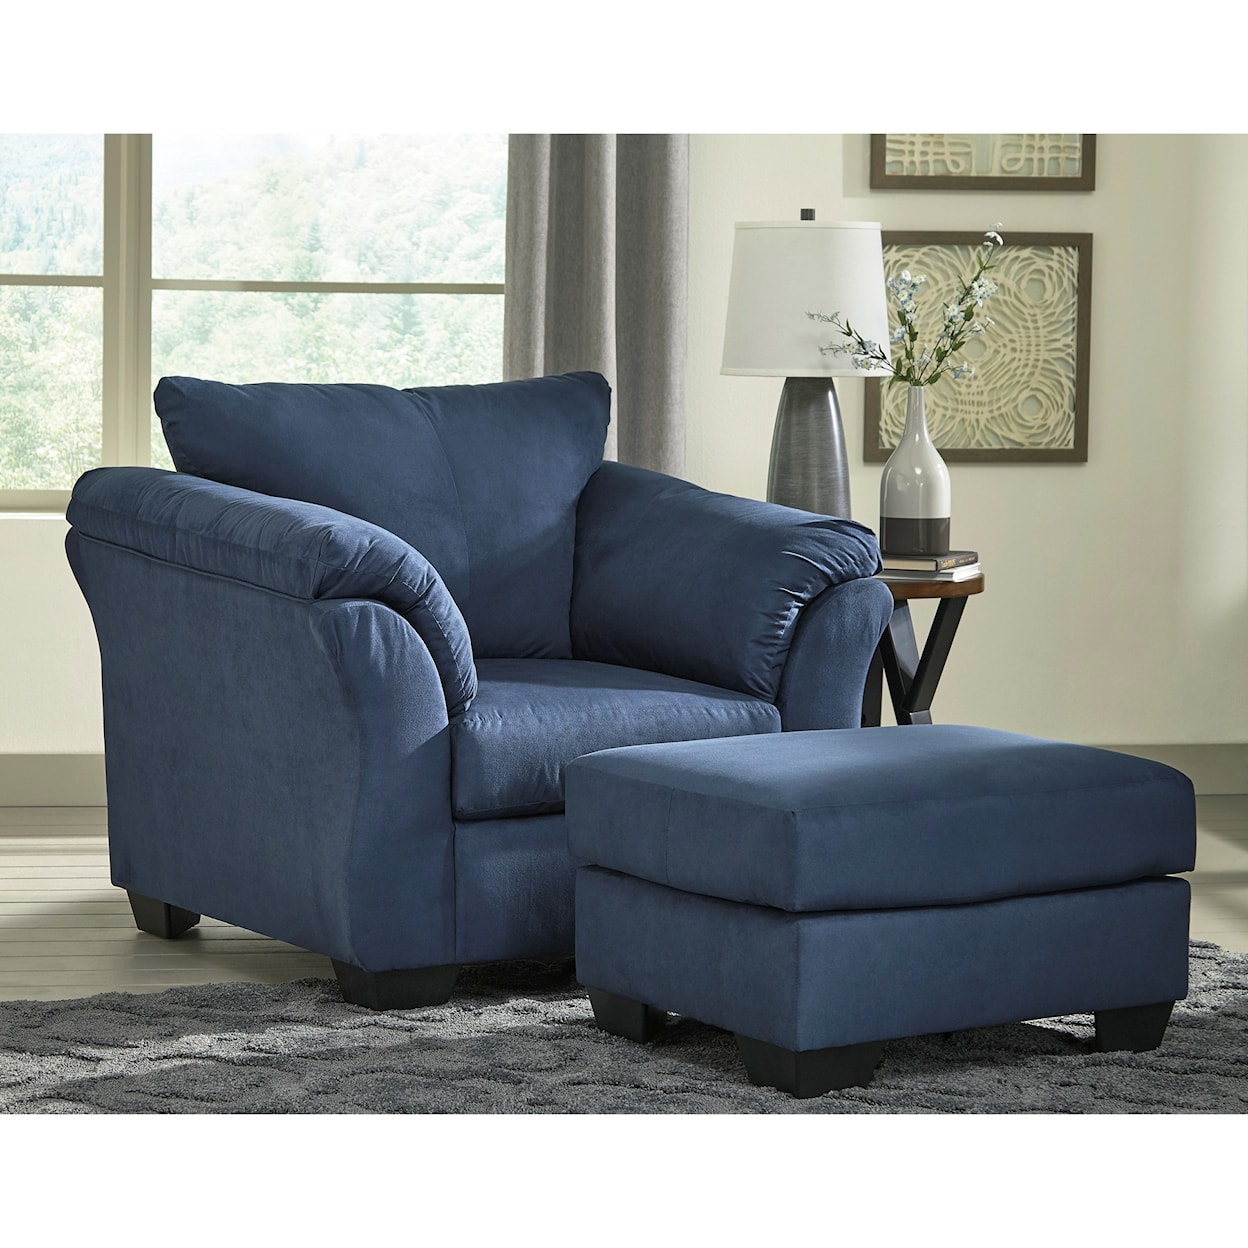 Ashley Furniture Signature Design Darcy Upholstered Chair